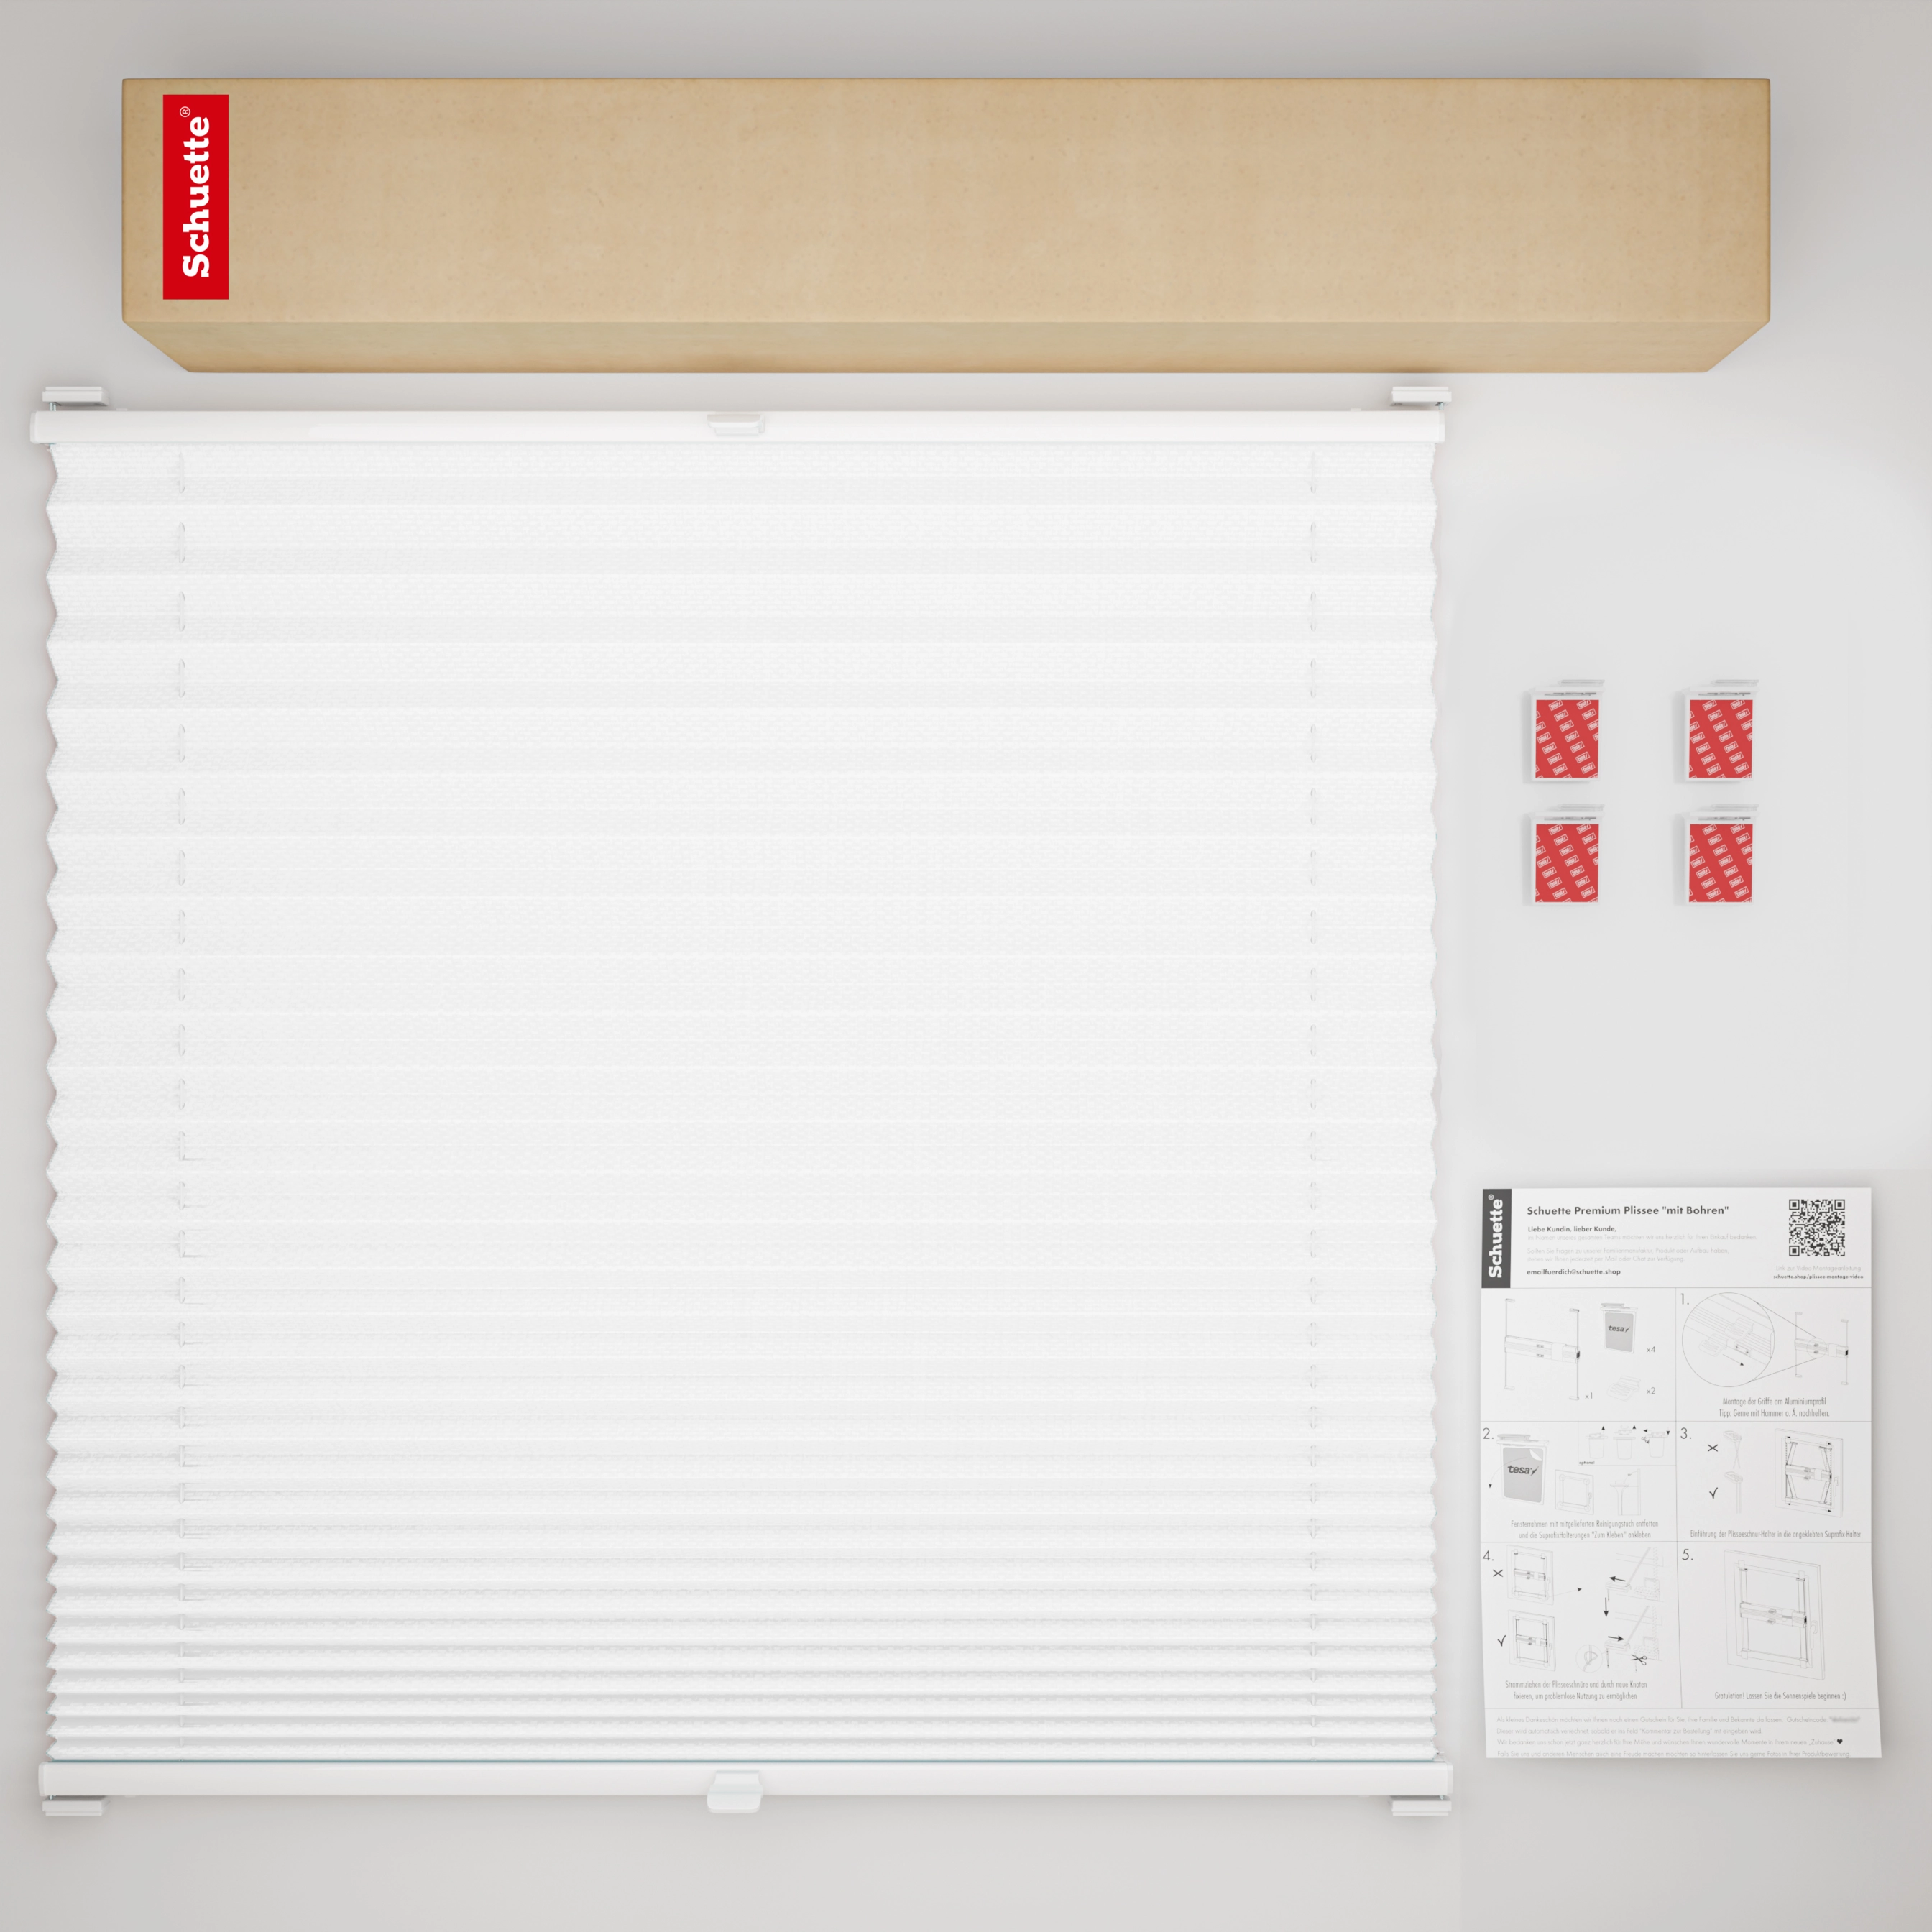 Schuette® Pleated blind without drilling made-to-measure • Suprafix Mounts “For glueing” • Premium Collection: White Day (White) • Profile color: White